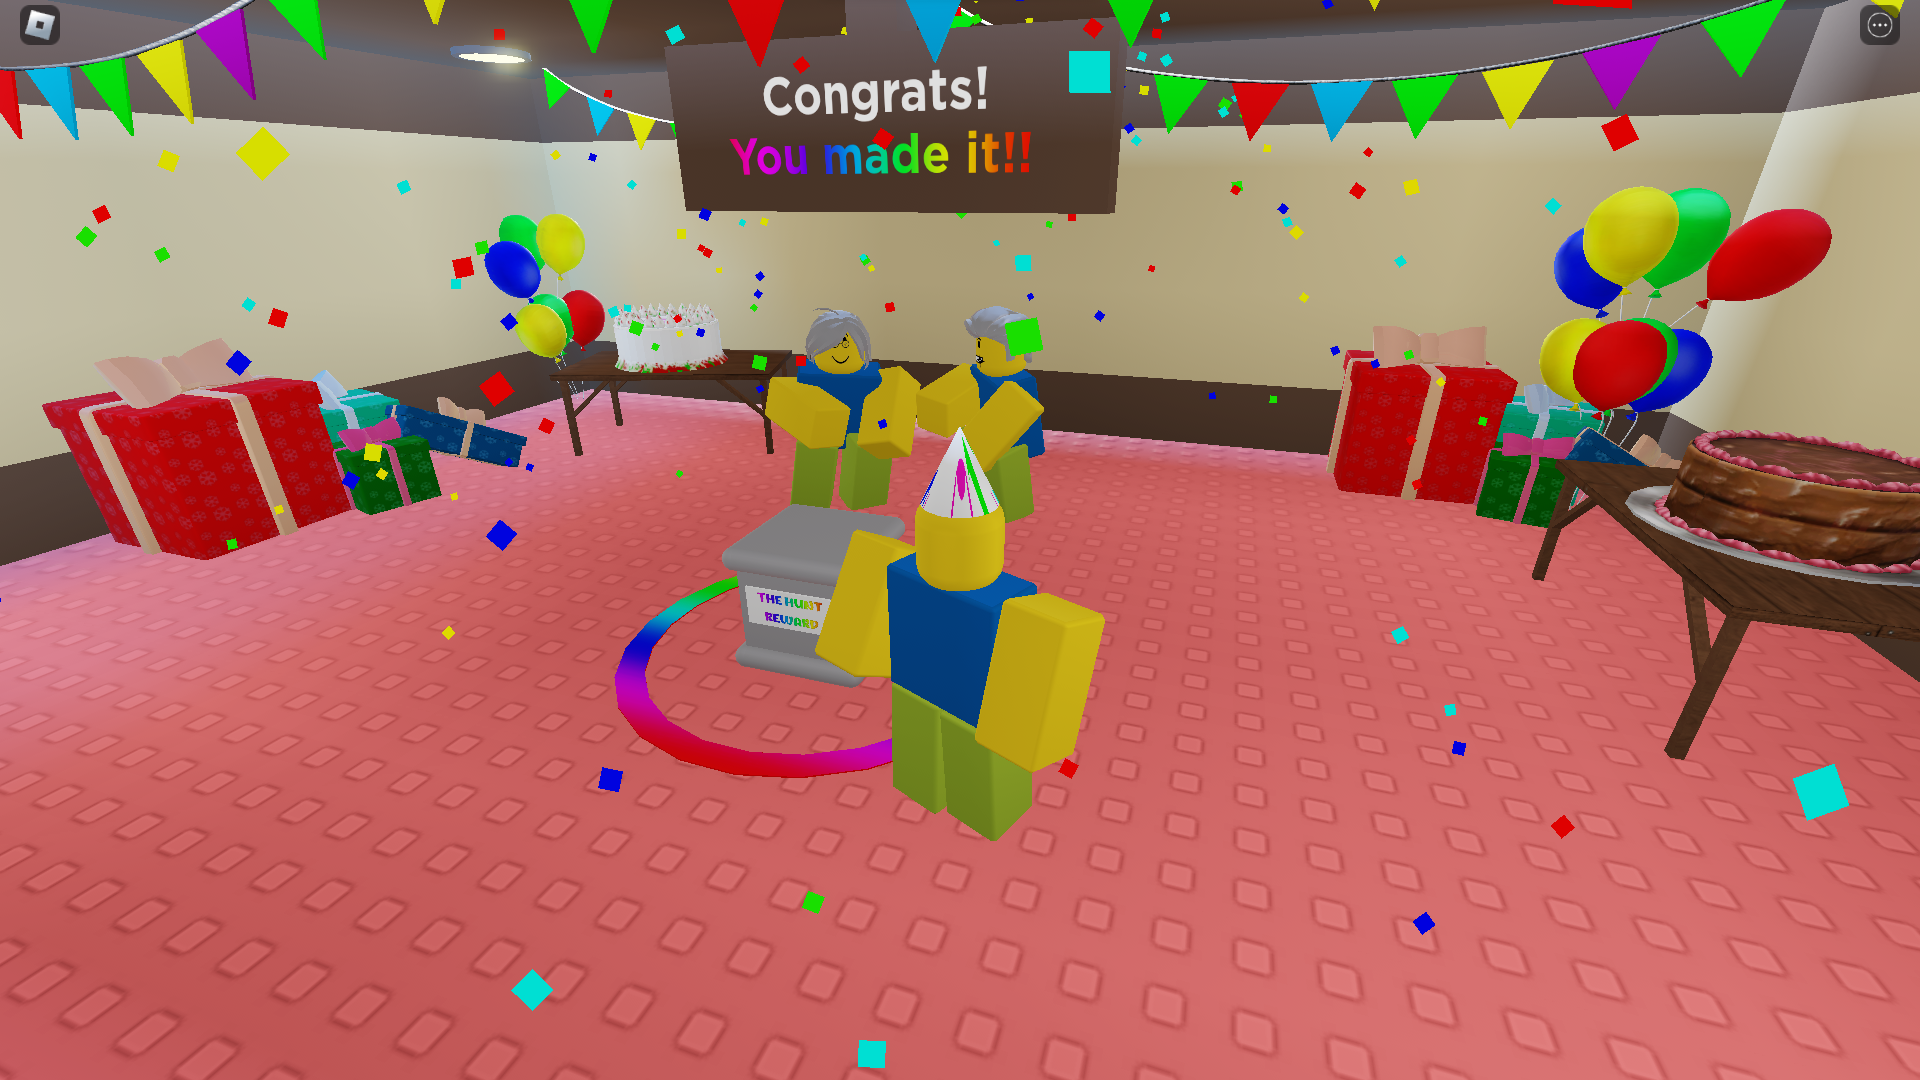 Grey haired mother and father in a room filled with tables with cakes, balloons, presents, and colorful flag banners